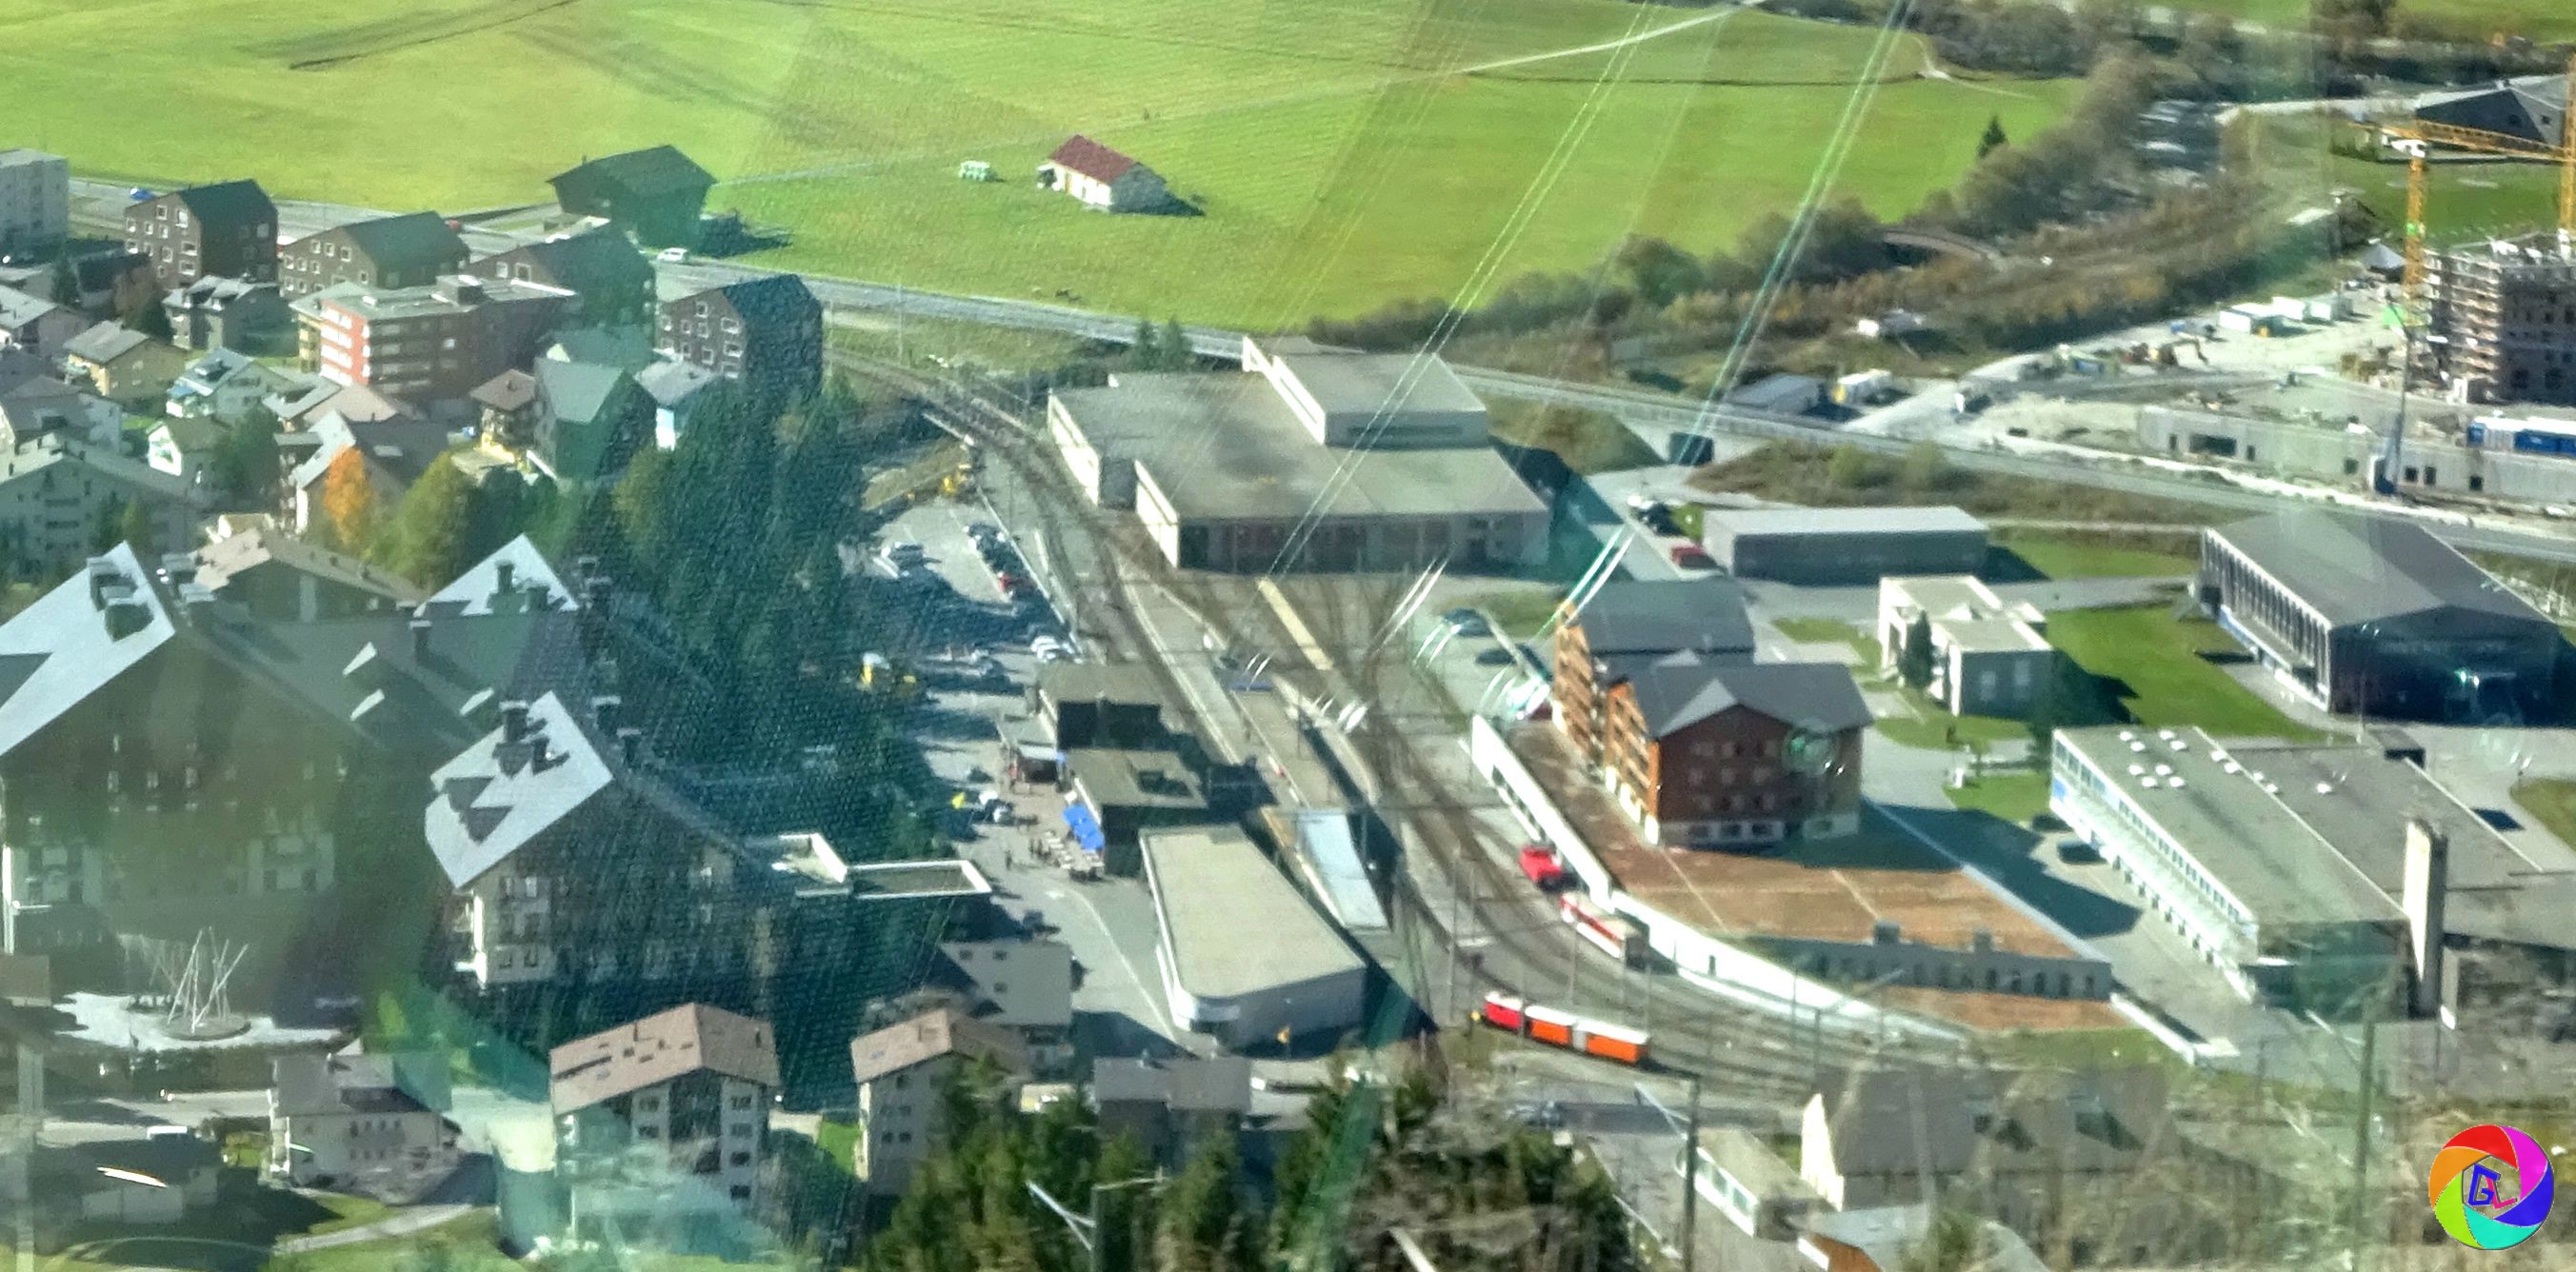 Approaching Andermatt station from above